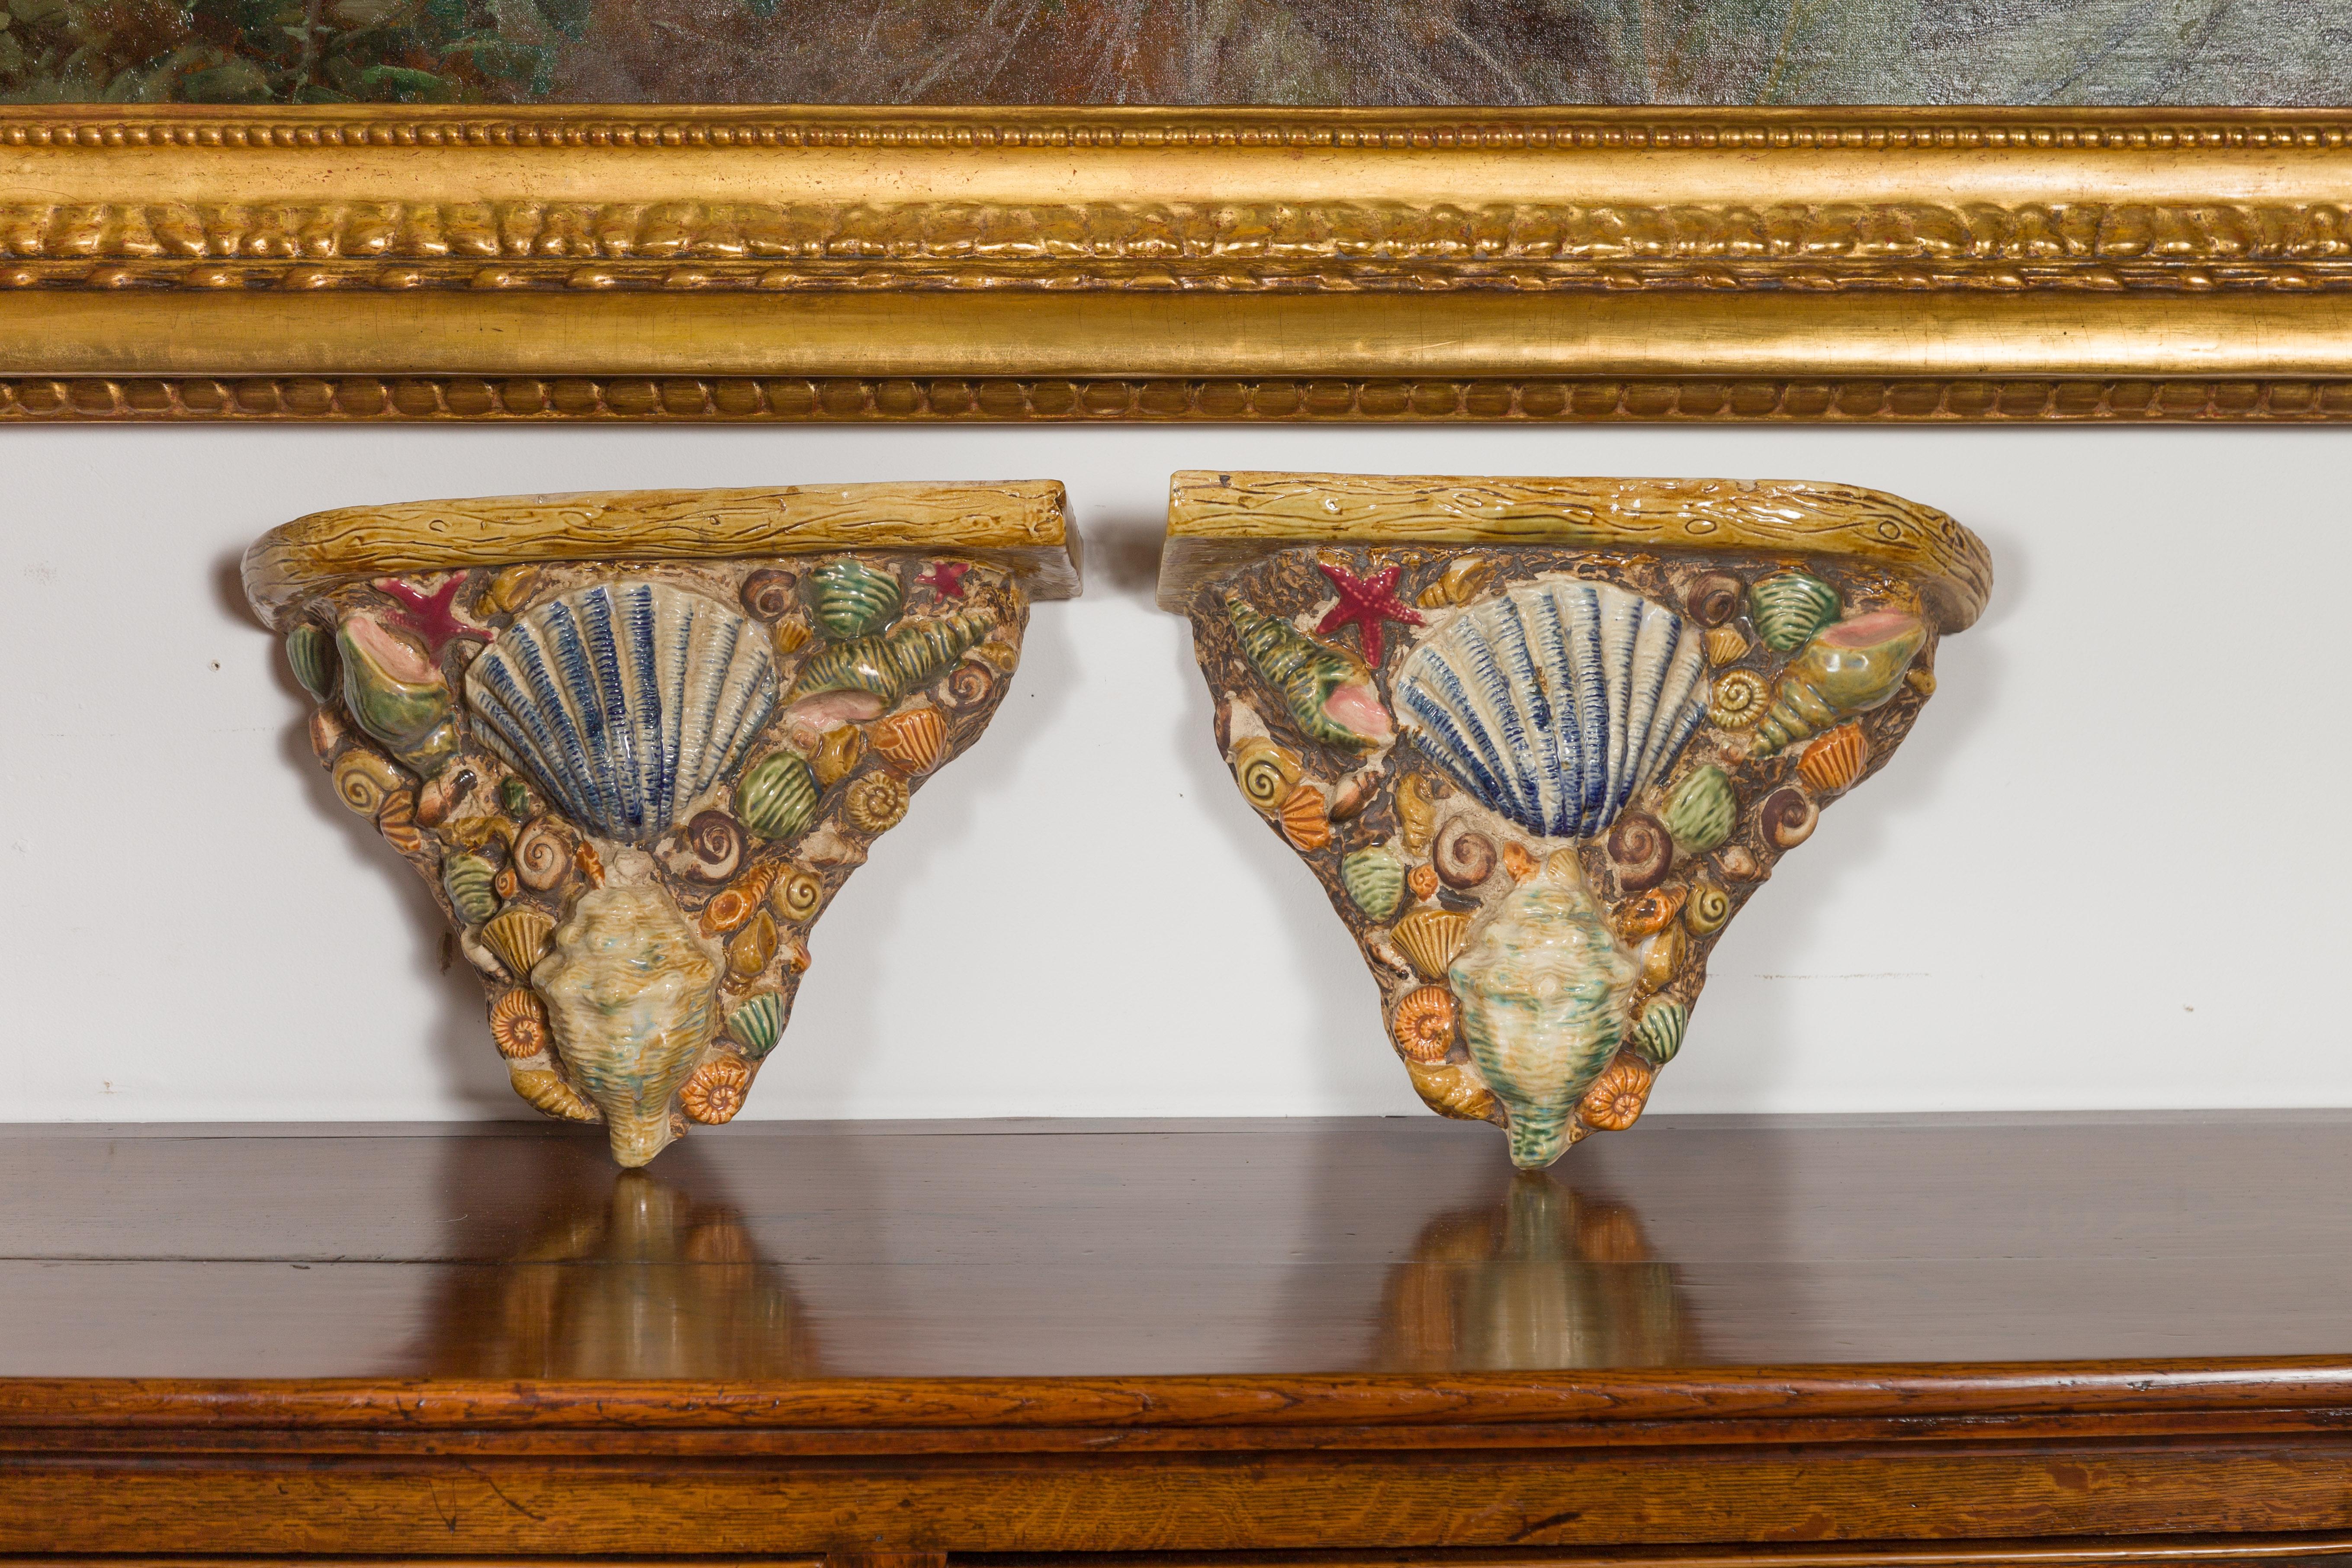 A pair of English majolica brackets from the mid-20th century, with seashell decor. Created in England during the midcentury period, each of this pair of majolica brackets attracts our attention with its colorful depiction of seashells, topped with